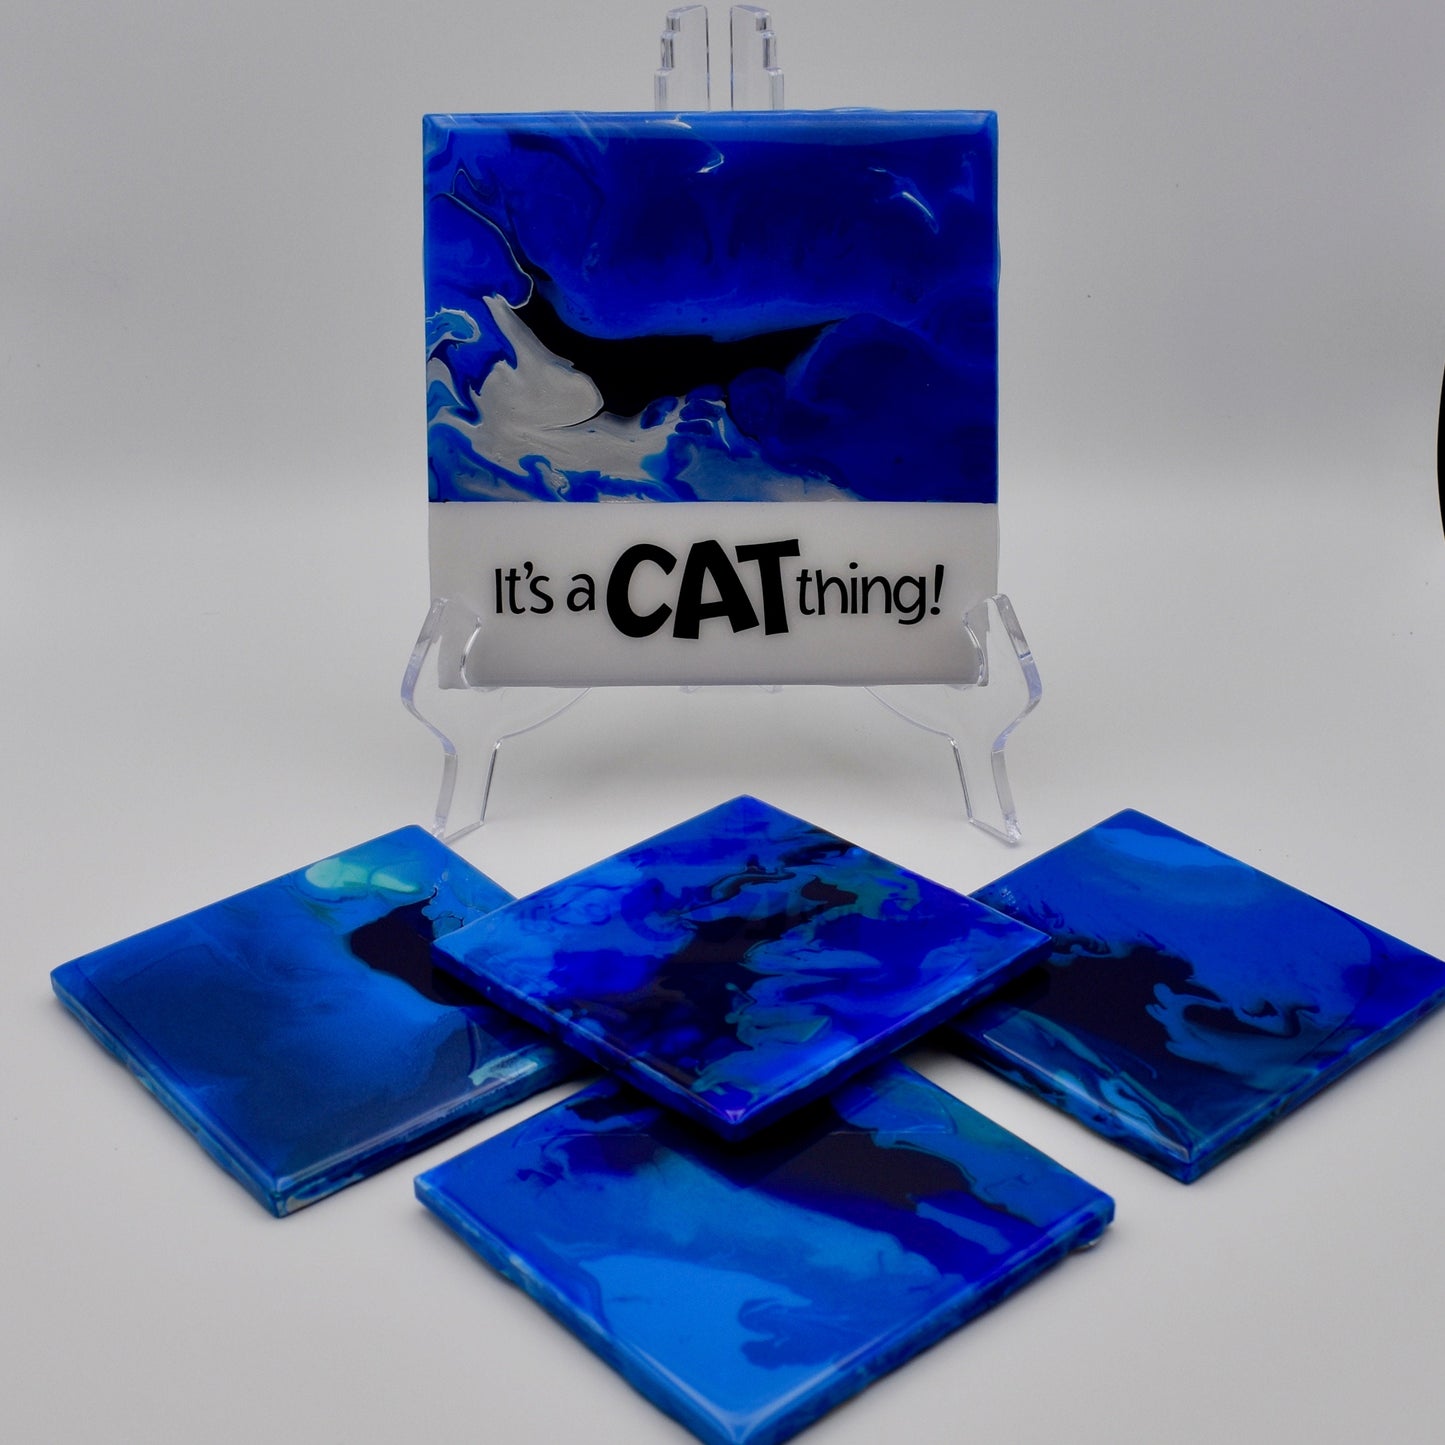 Cat Lover Gift - Purrfect Cat Gift - Cat Lover Gift for Her - Blue Coasters - Ceramic Coaster Set - Wine Lovers  - Pour Painting Coasters